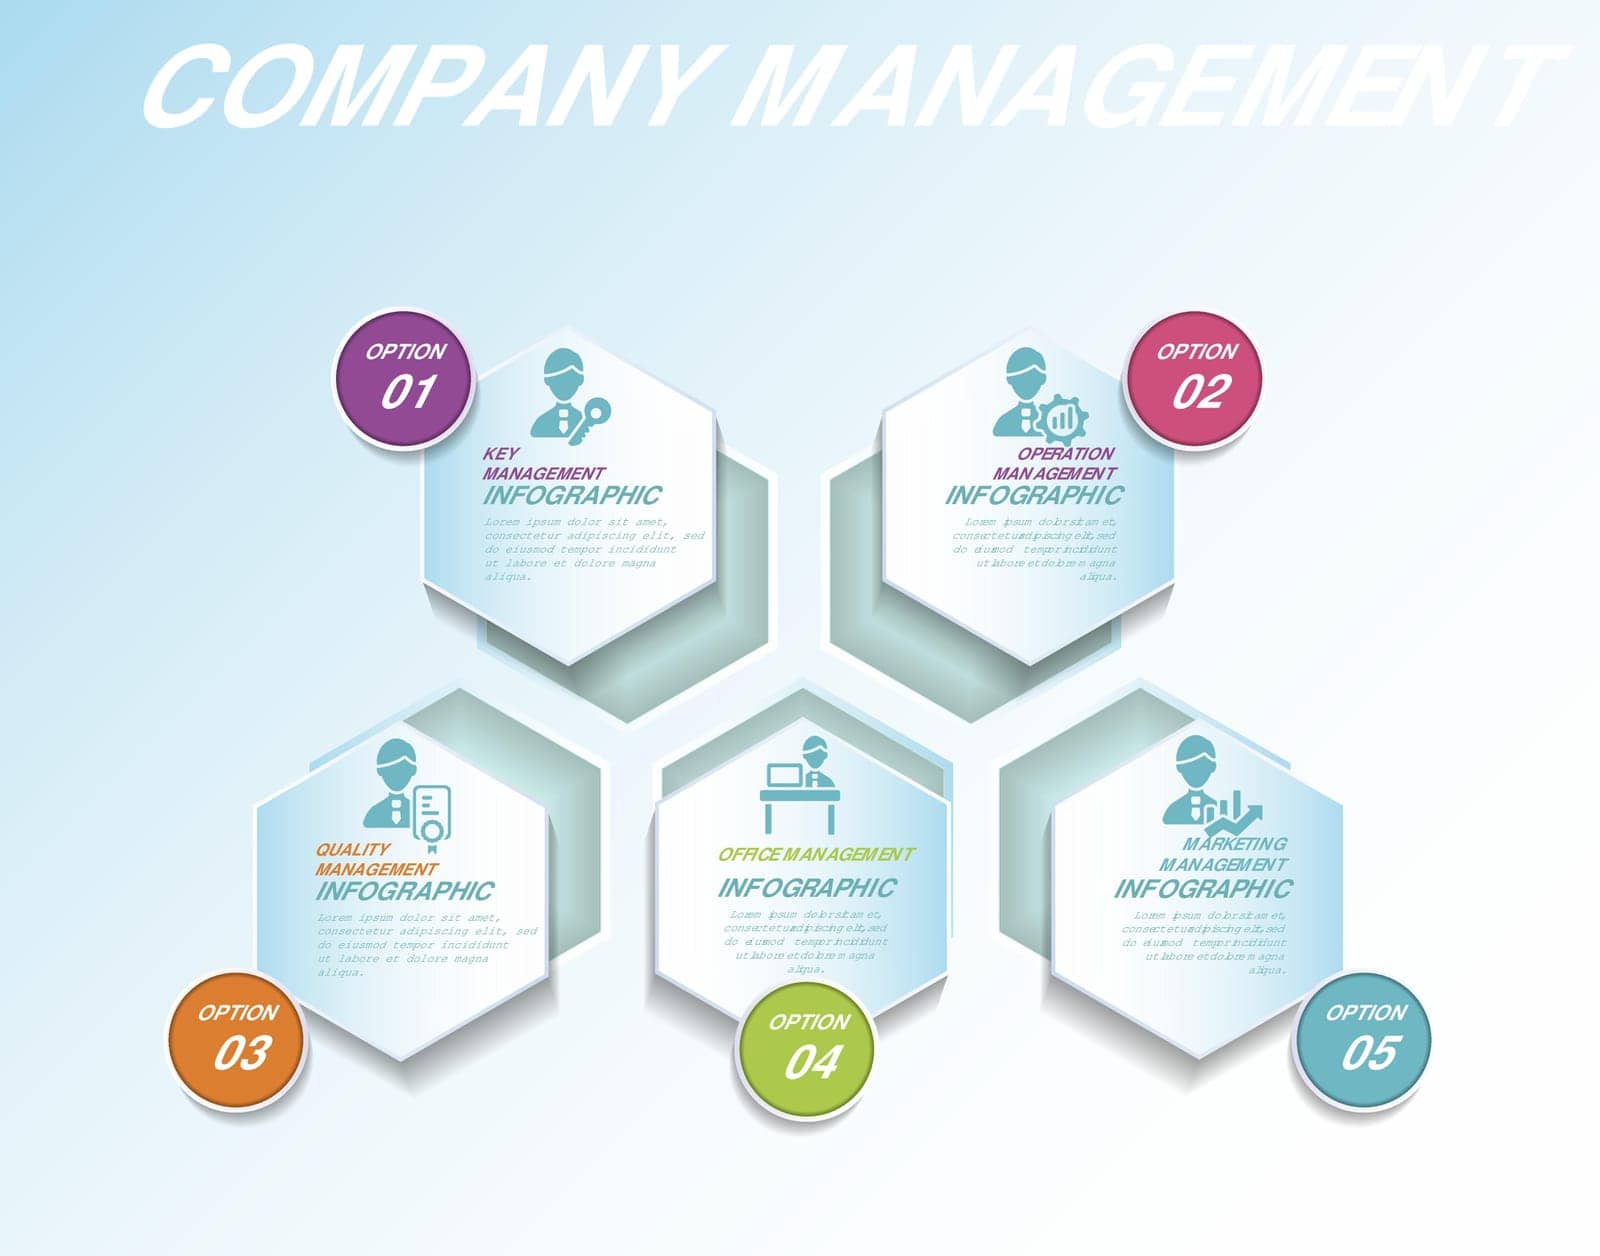 Infographic Company Management template. Icons in different colors. Include Key Management, Operation Management, Quality Management, Office and others. by simakovavector